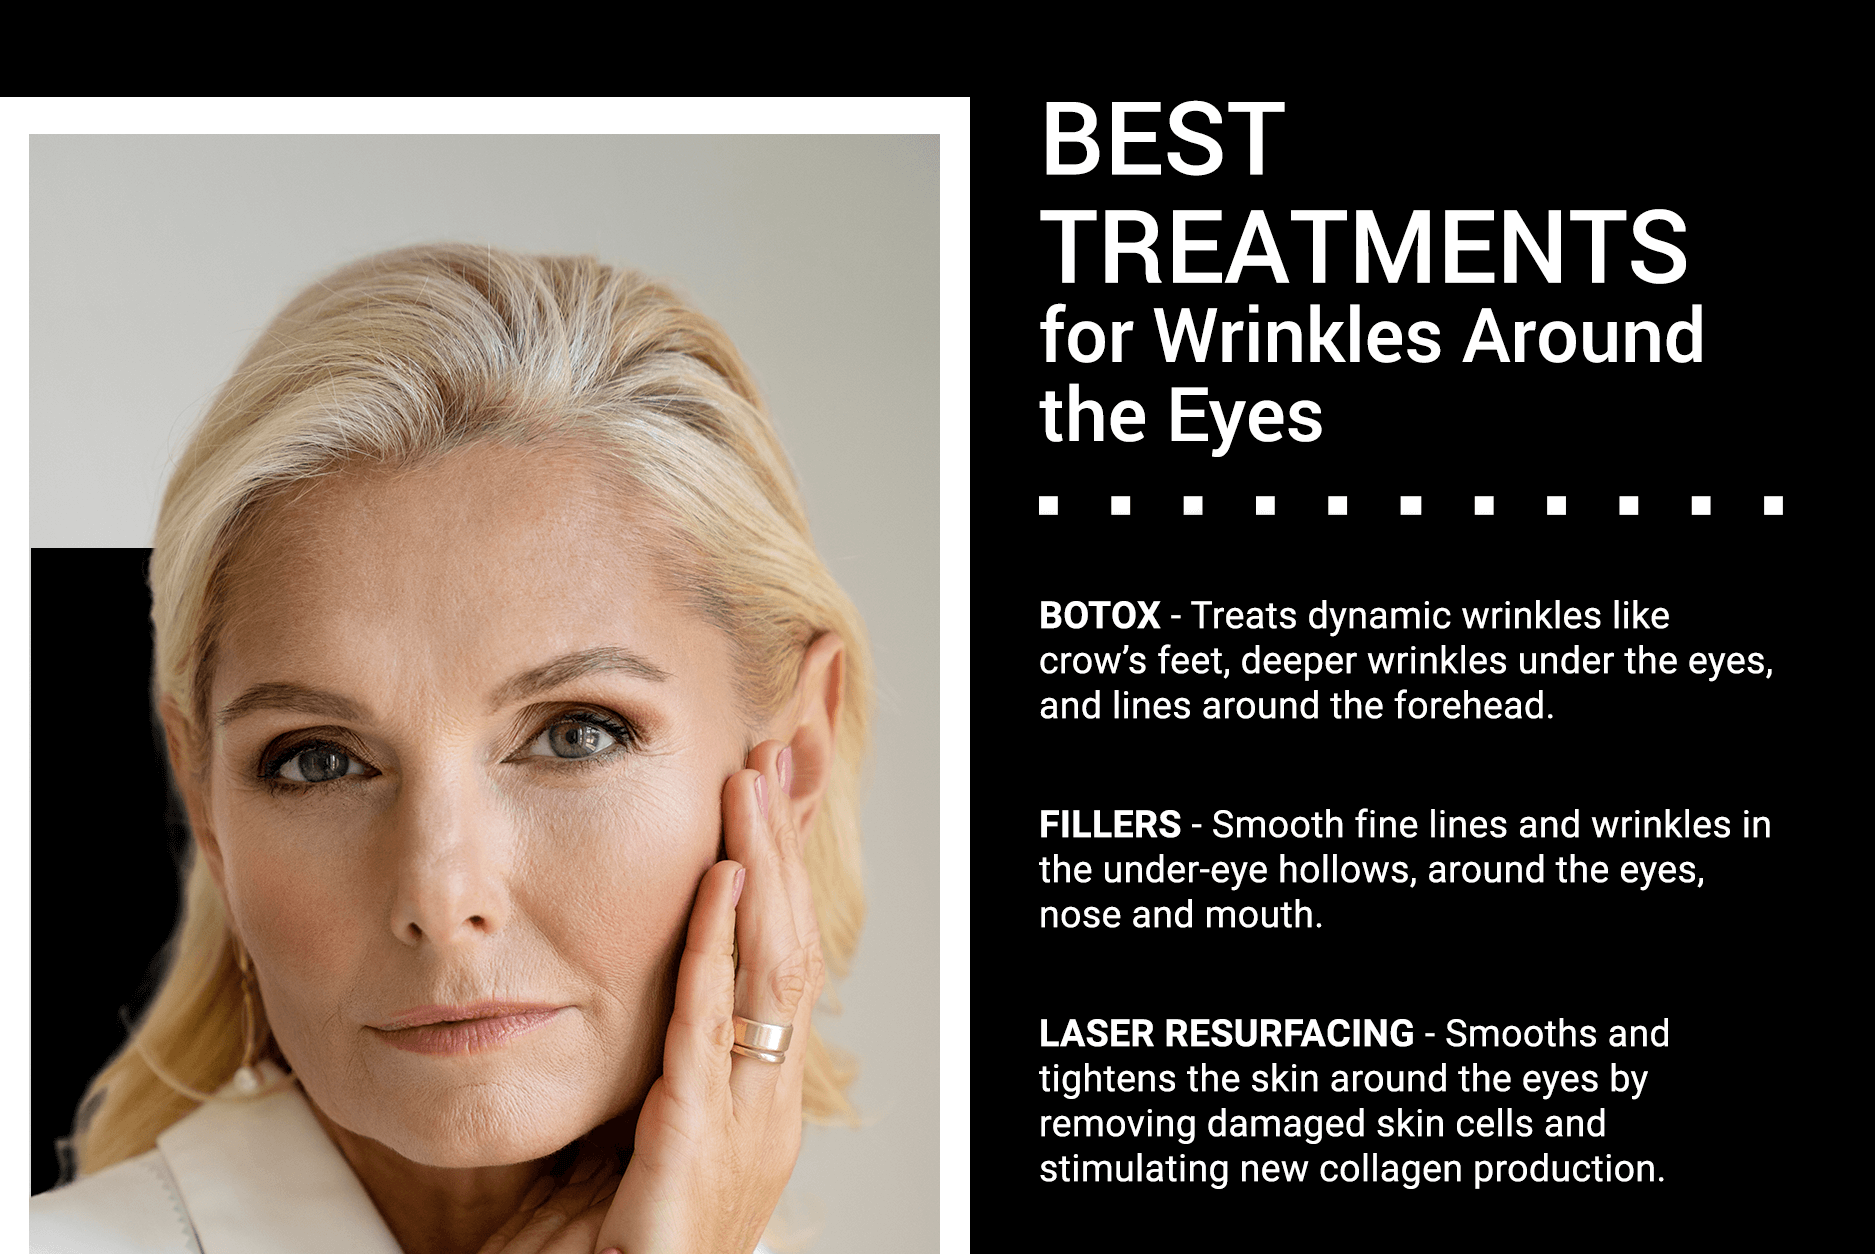 Best Treatments for Wrinkles Around the Eyes [Infographic], Daniel Brown M.D